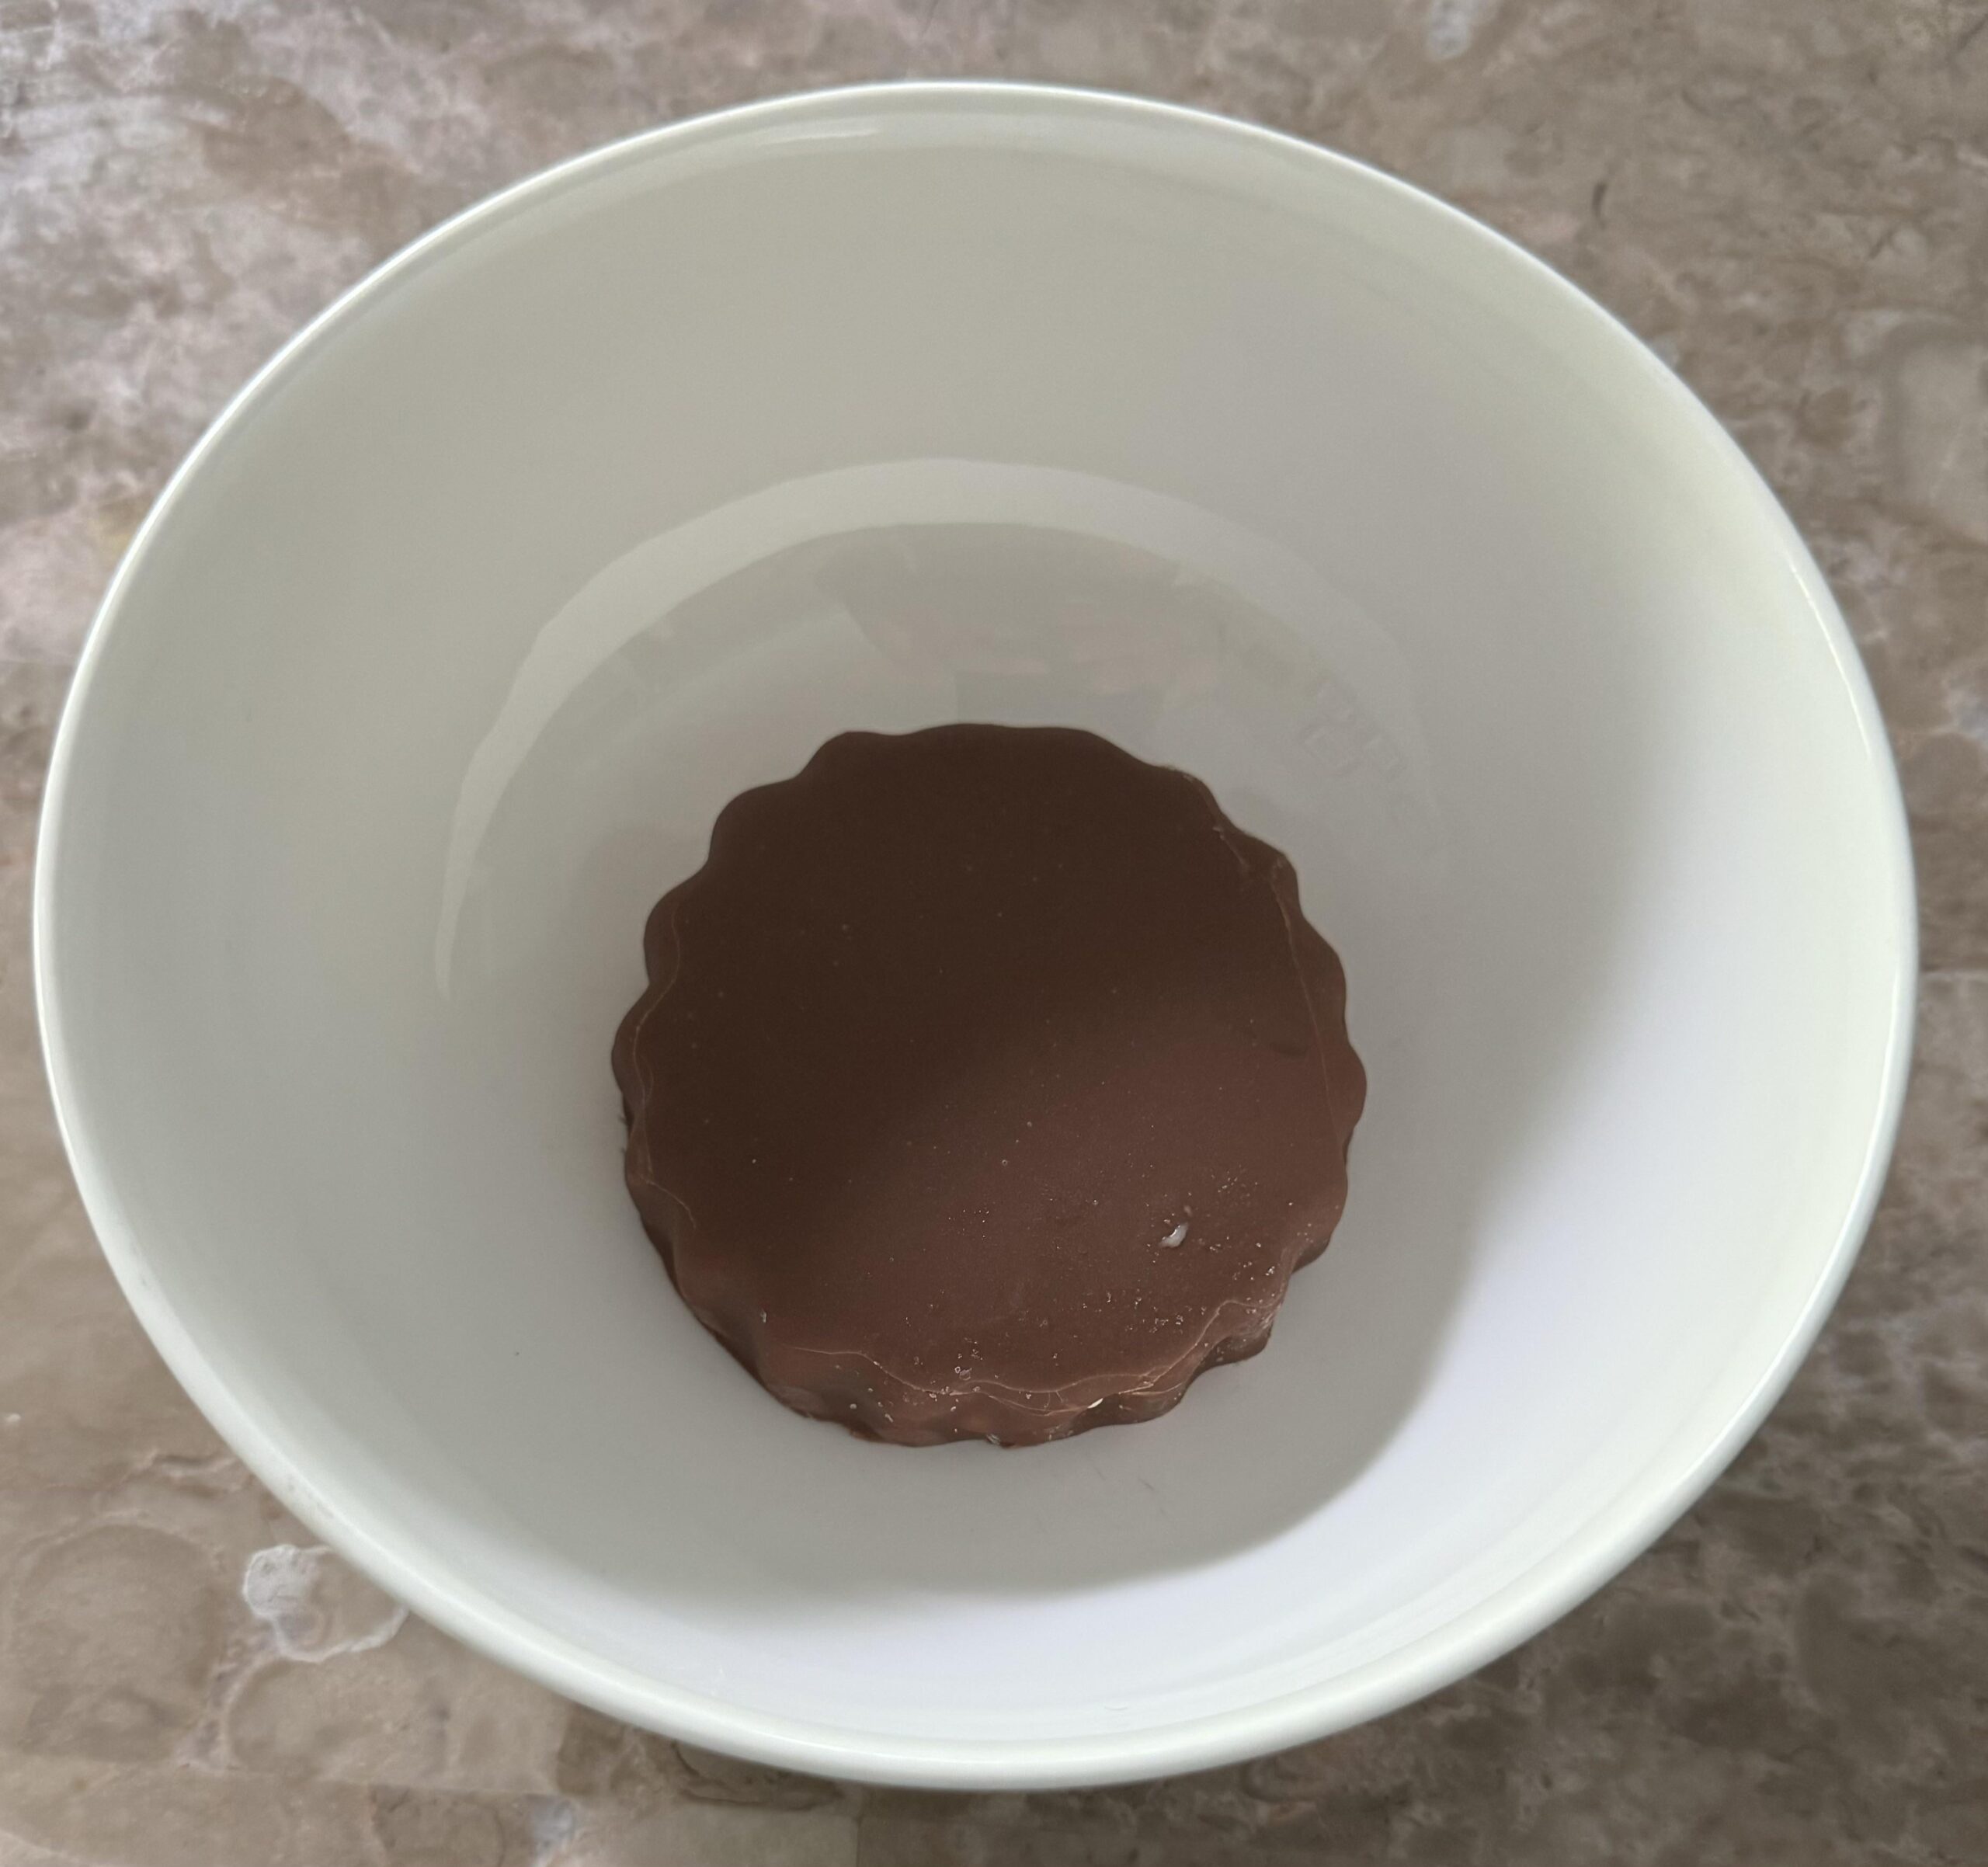 Reese’s Frozen Peanut Butter Dessert Cup - Dining and Cooking